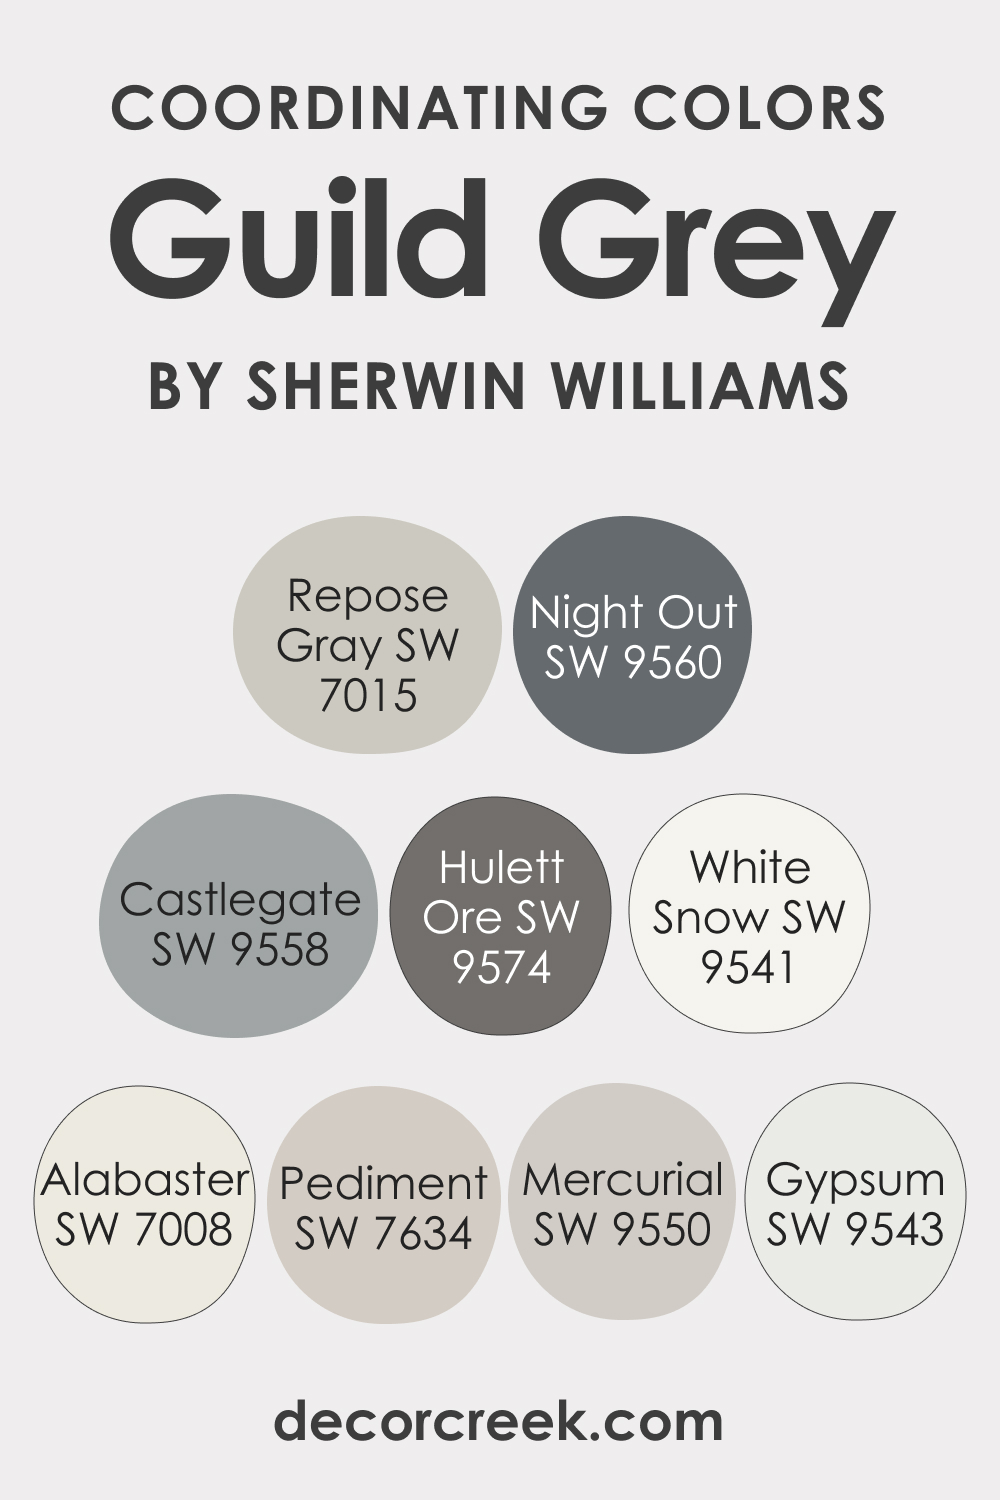 Coordinating Colors of SW 9561 Guild Grey